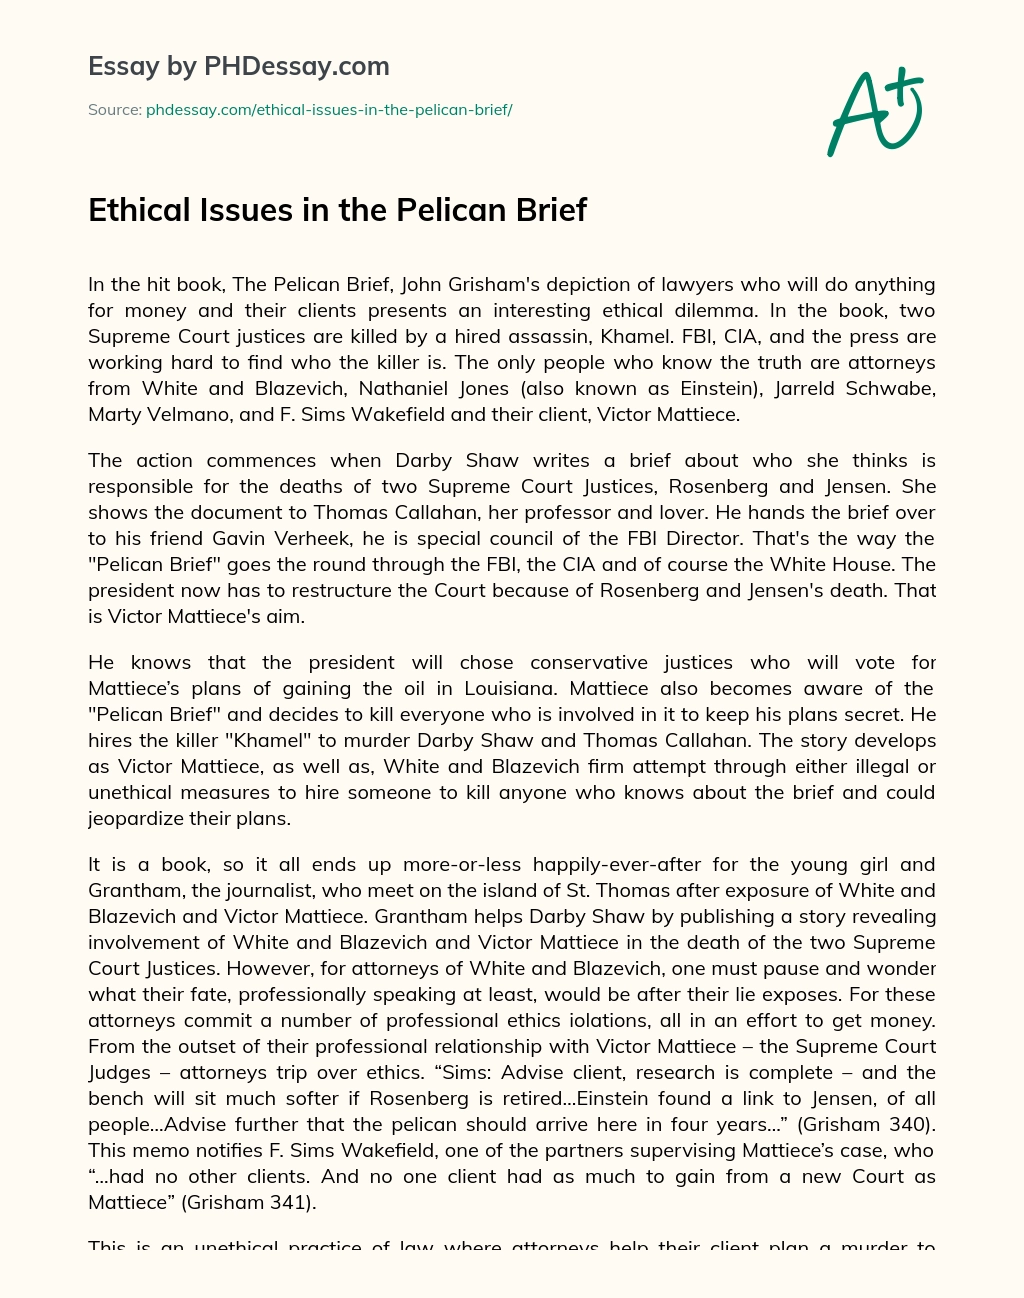 Ethical Issues in the Pelican Brief essay